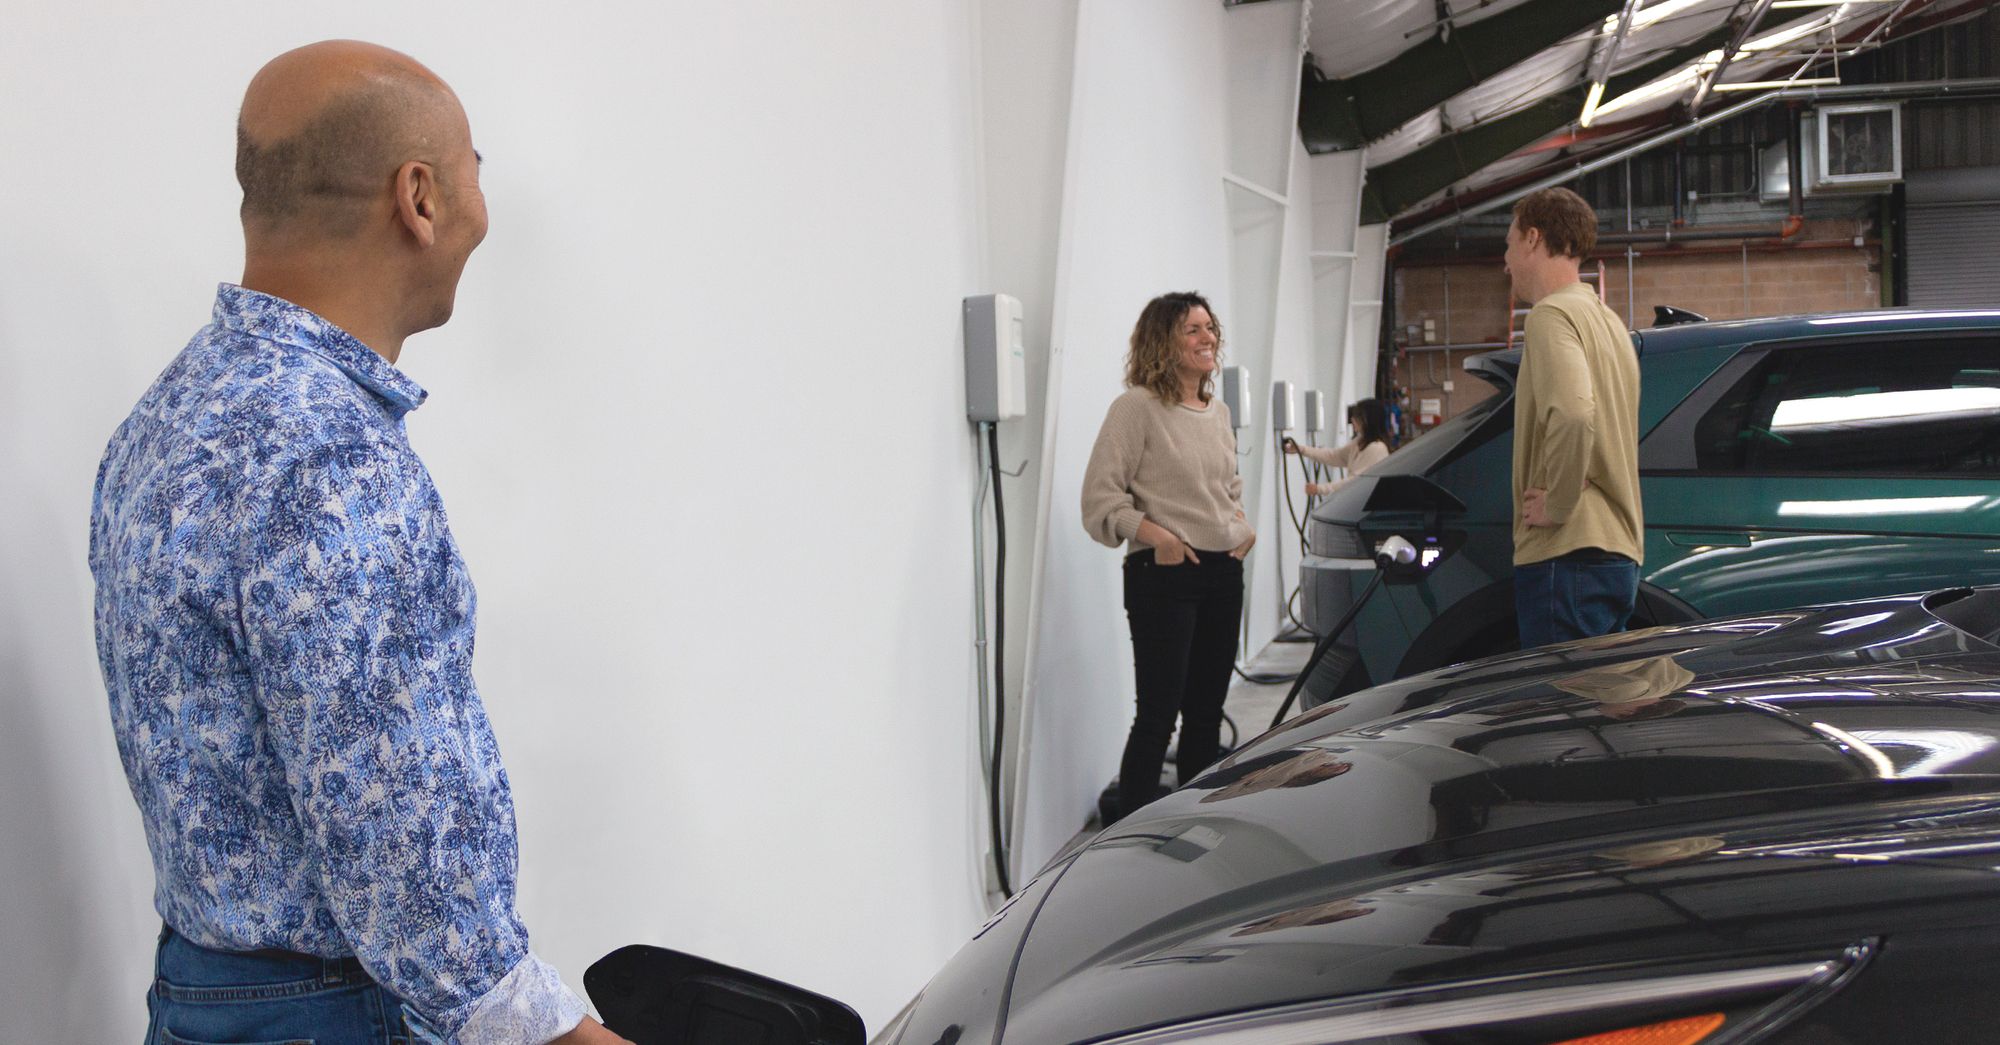 EverCharge Unveils Its Customer Experience Center to Showcase Its Full Suite of Charging Products